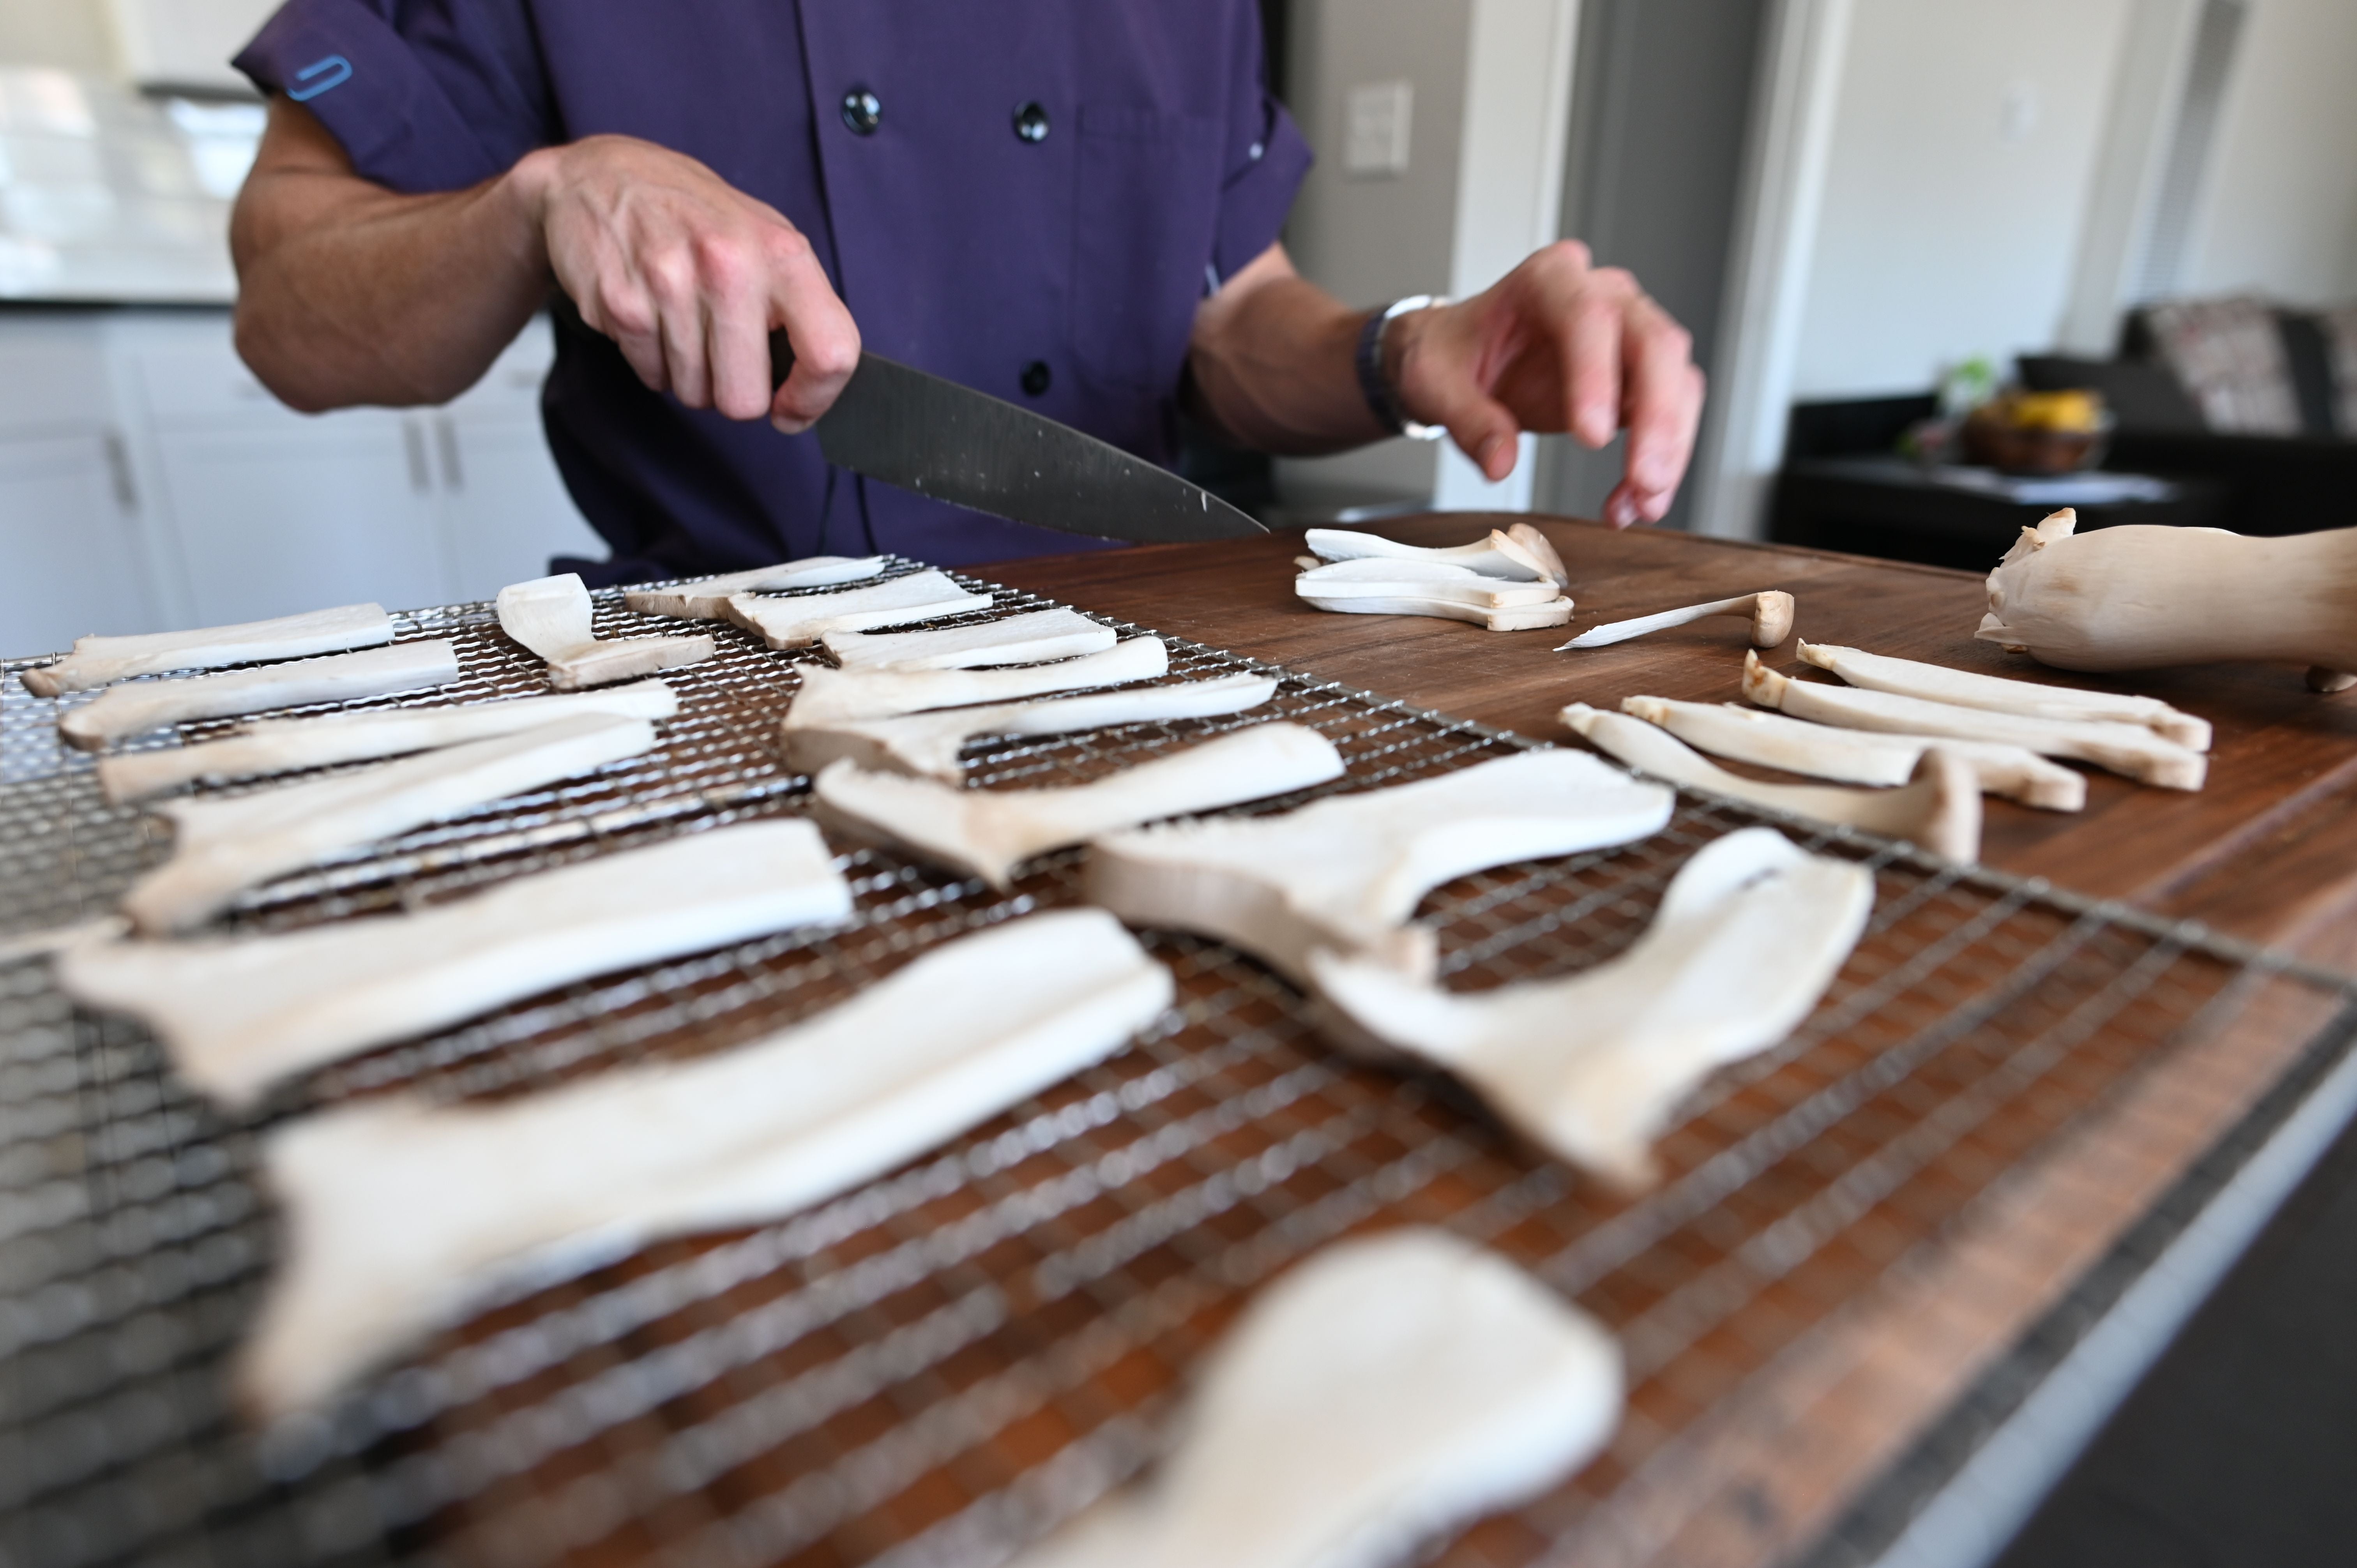 King oyster mushrooms being sliced and placed on dehydrator racks